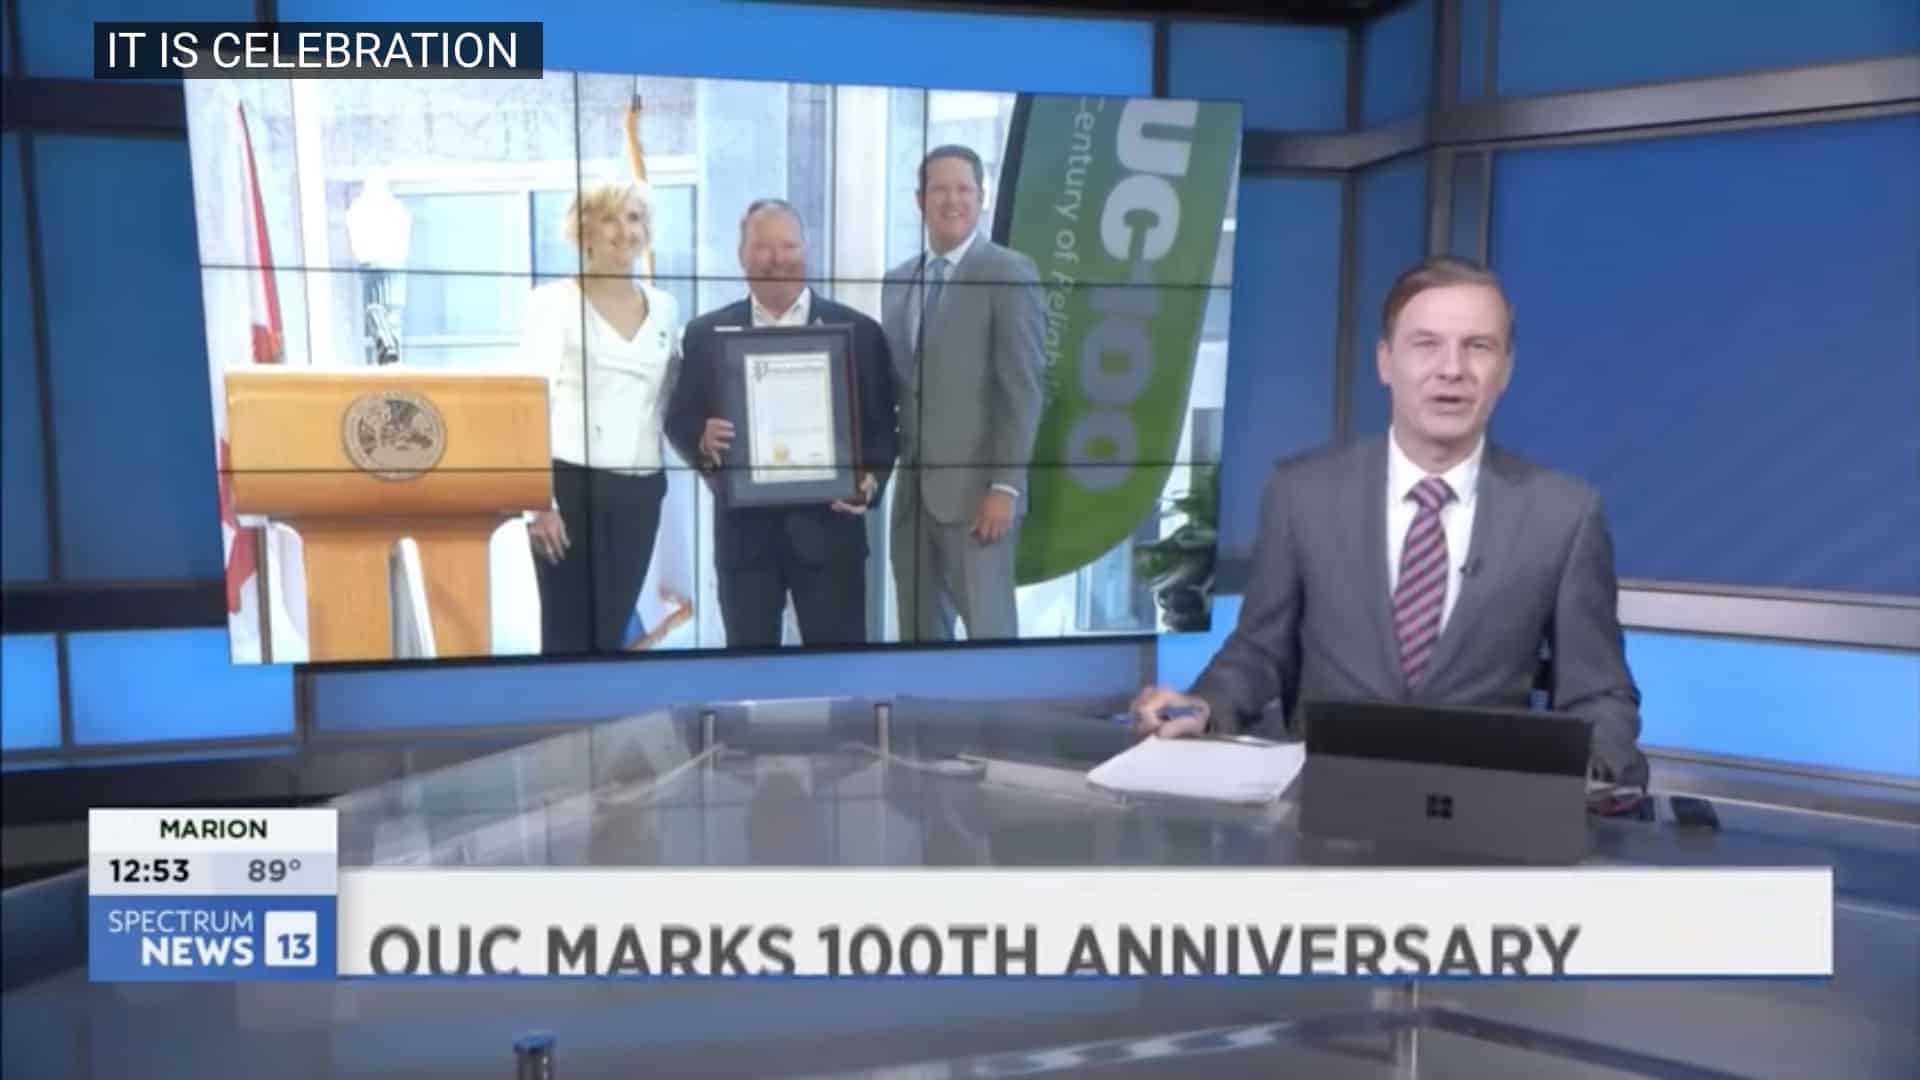 OUC Marks 100th Anniversary - Spectrum News 13